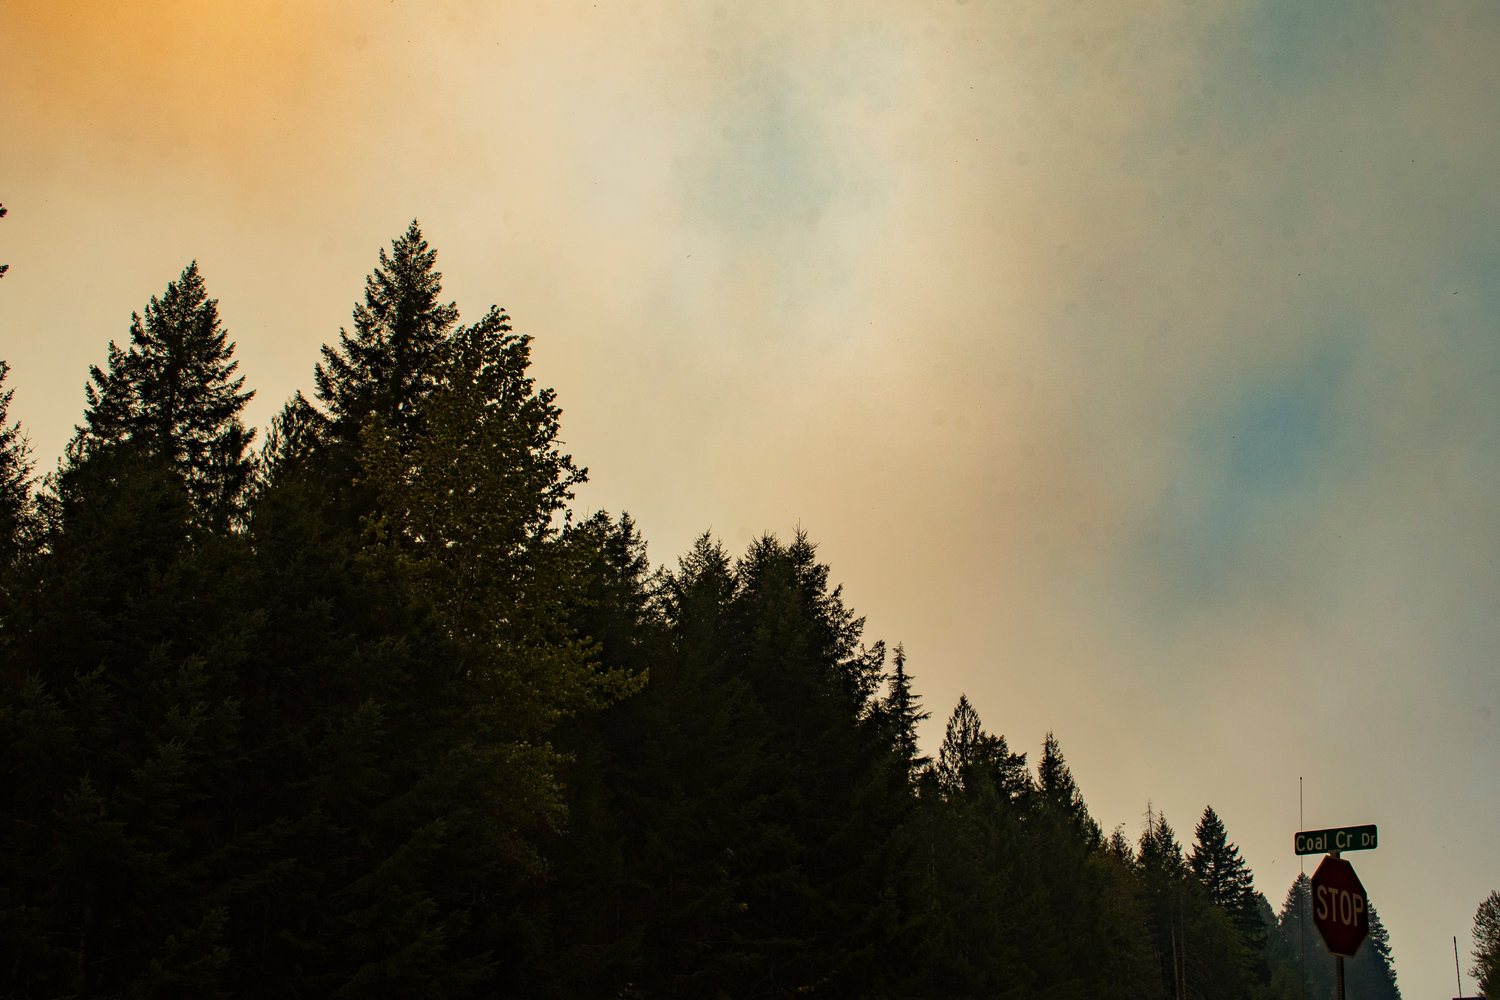 Smoke from the Goat Rocks Fire rises in heavy orange plumes above the trees near Coal Creek Drive east of Packwood Sept. 10.